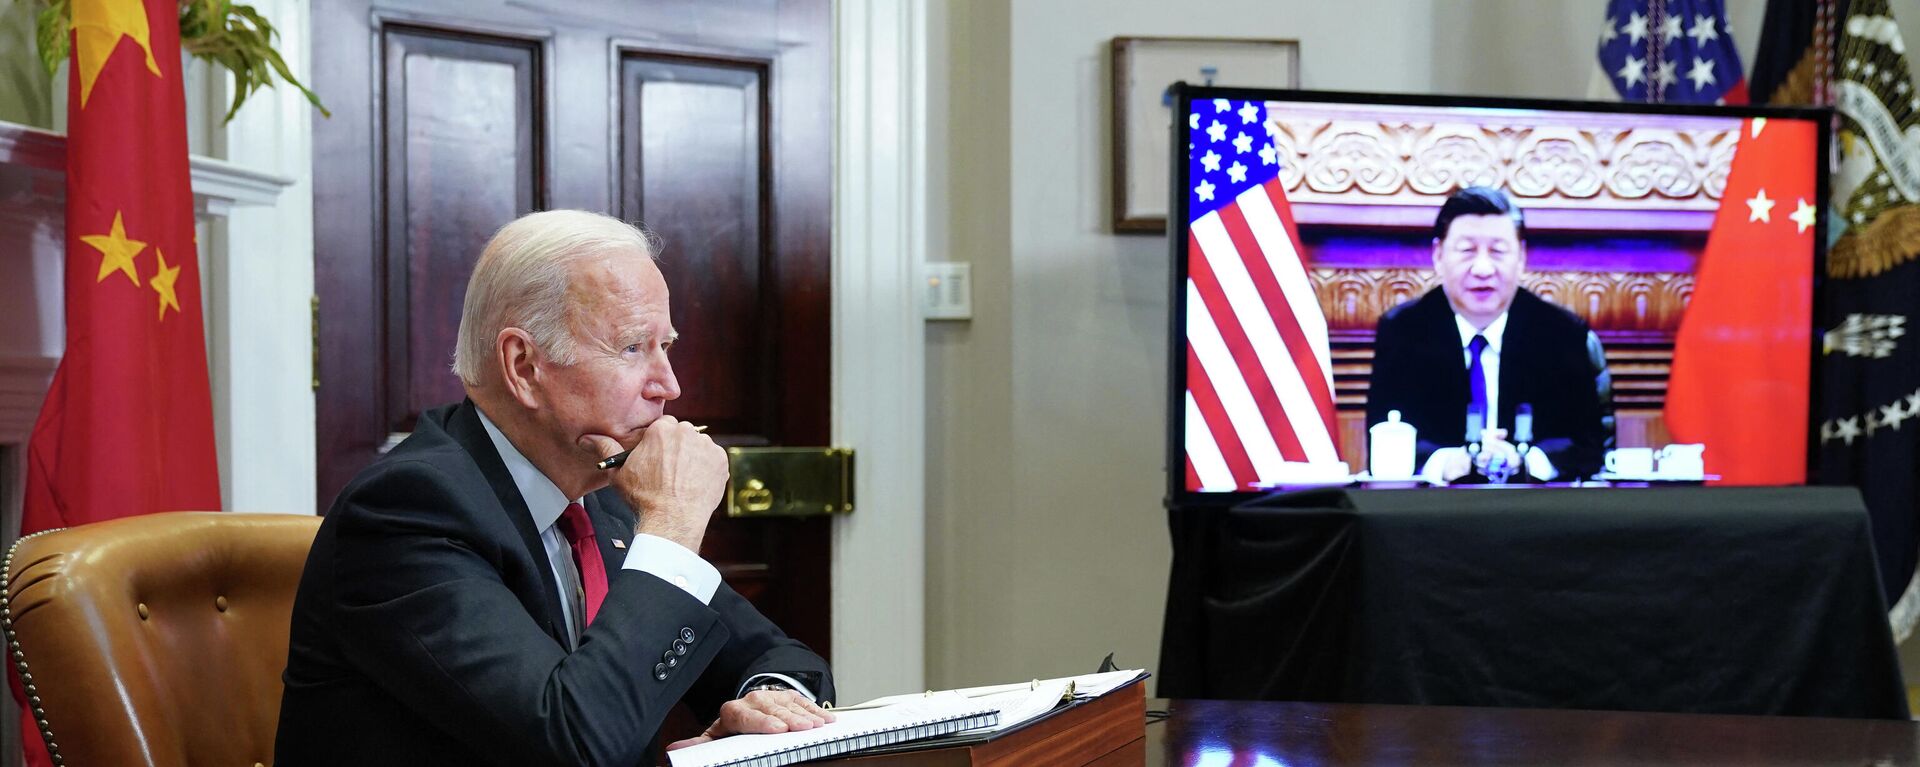 US President Joe Biden meets with China's President Xi Jinping during a virtual summit from the Roosevelt Room of the White House in Washington, DC, November 15, 2021.  - Sputnik International, 1920, 27.05.2022